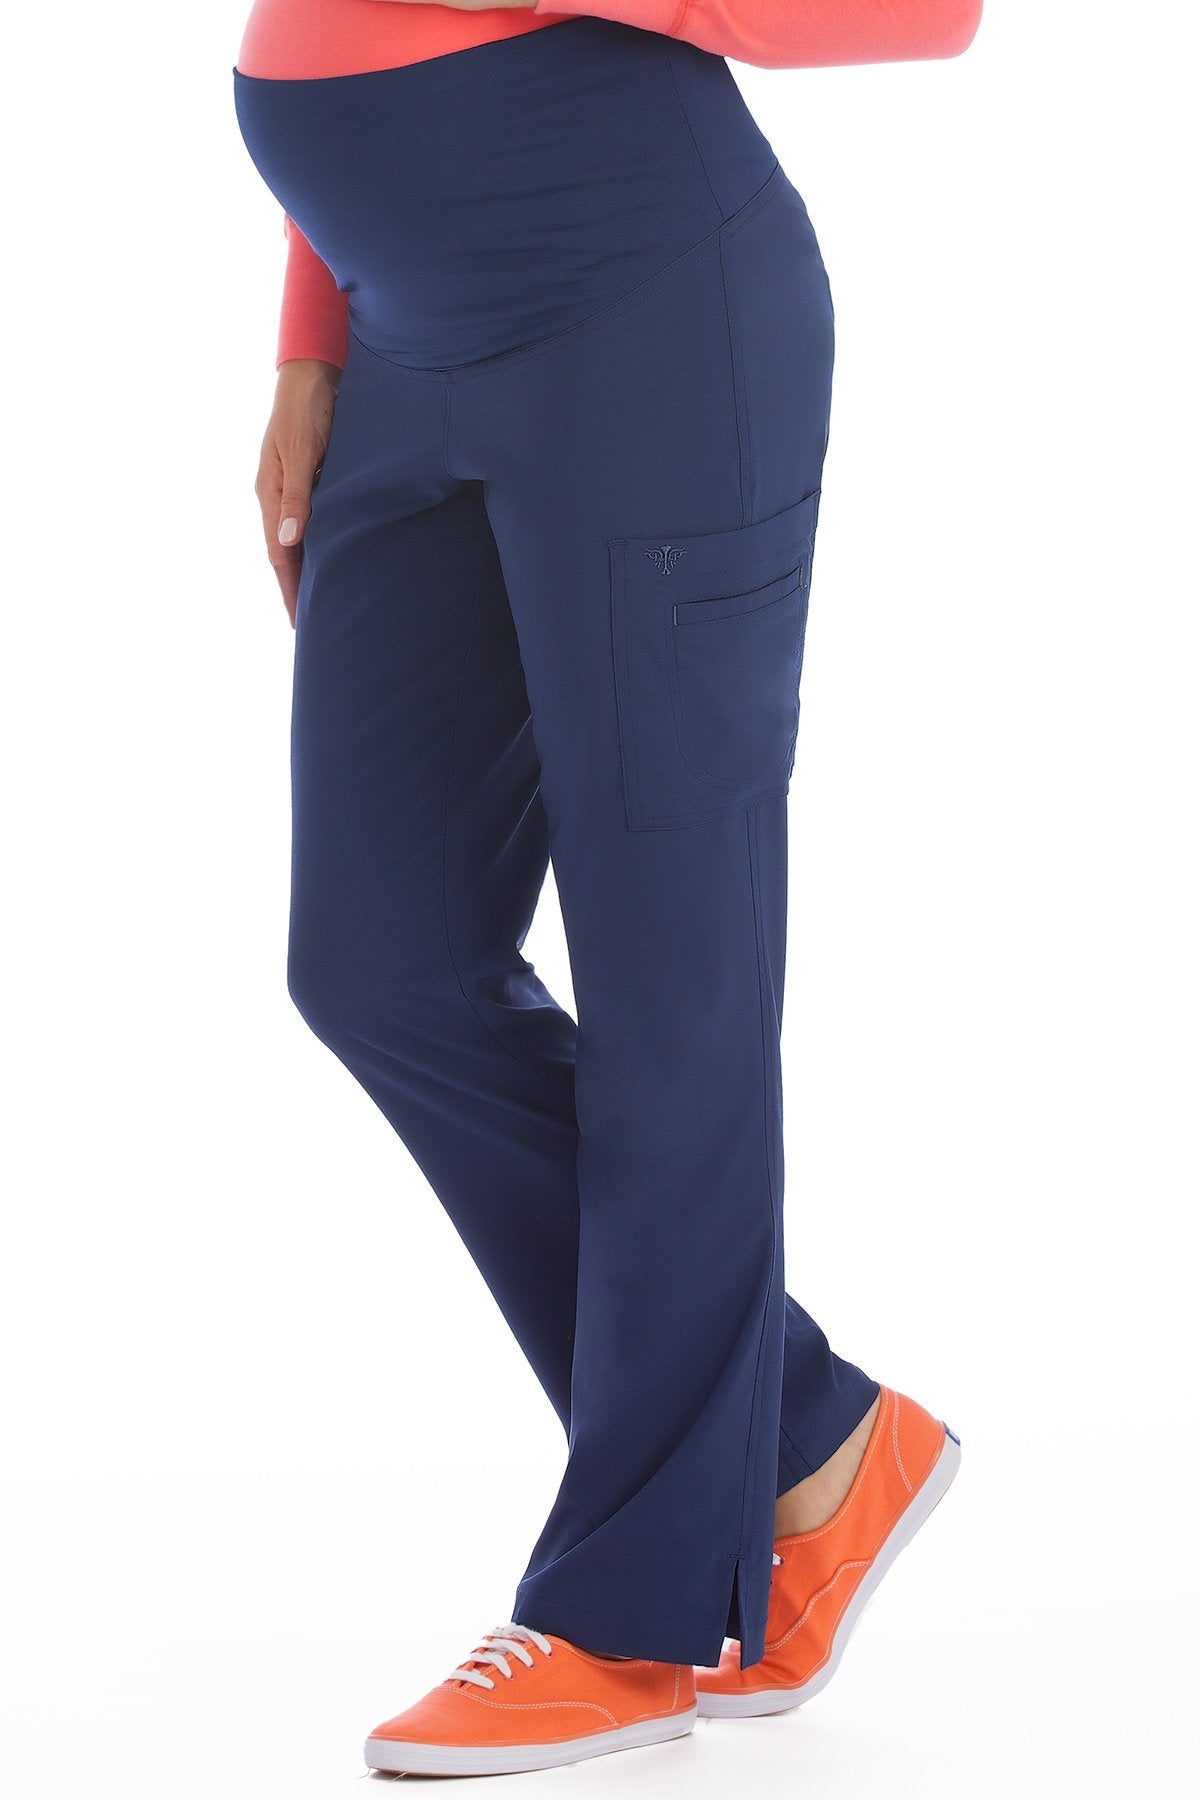 Med Couture Activate Maternity Pant Navy